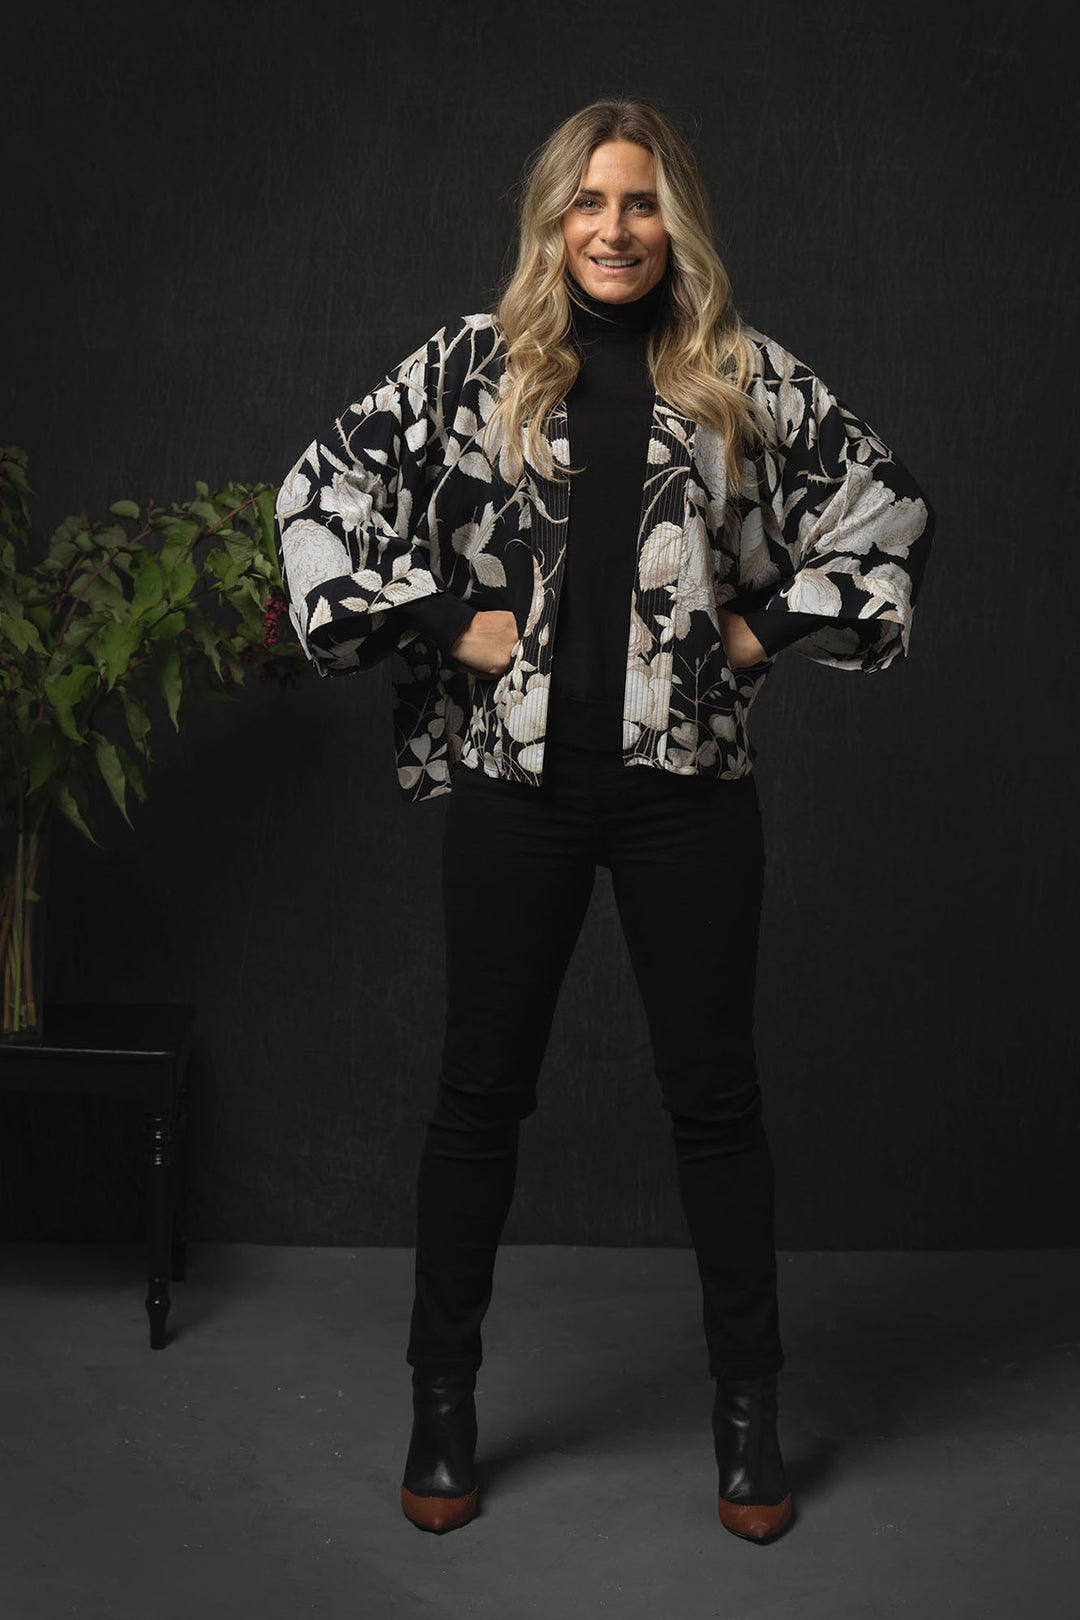 Rosebush Black Crepe Kimono- Our bestselling kimono jackets have loose ¾ length sleeves, an open front and a lightly embroidered lapel. Pair with a matching camisole and your favourite jeans in summer or layer over a polo neck during the cooler months.